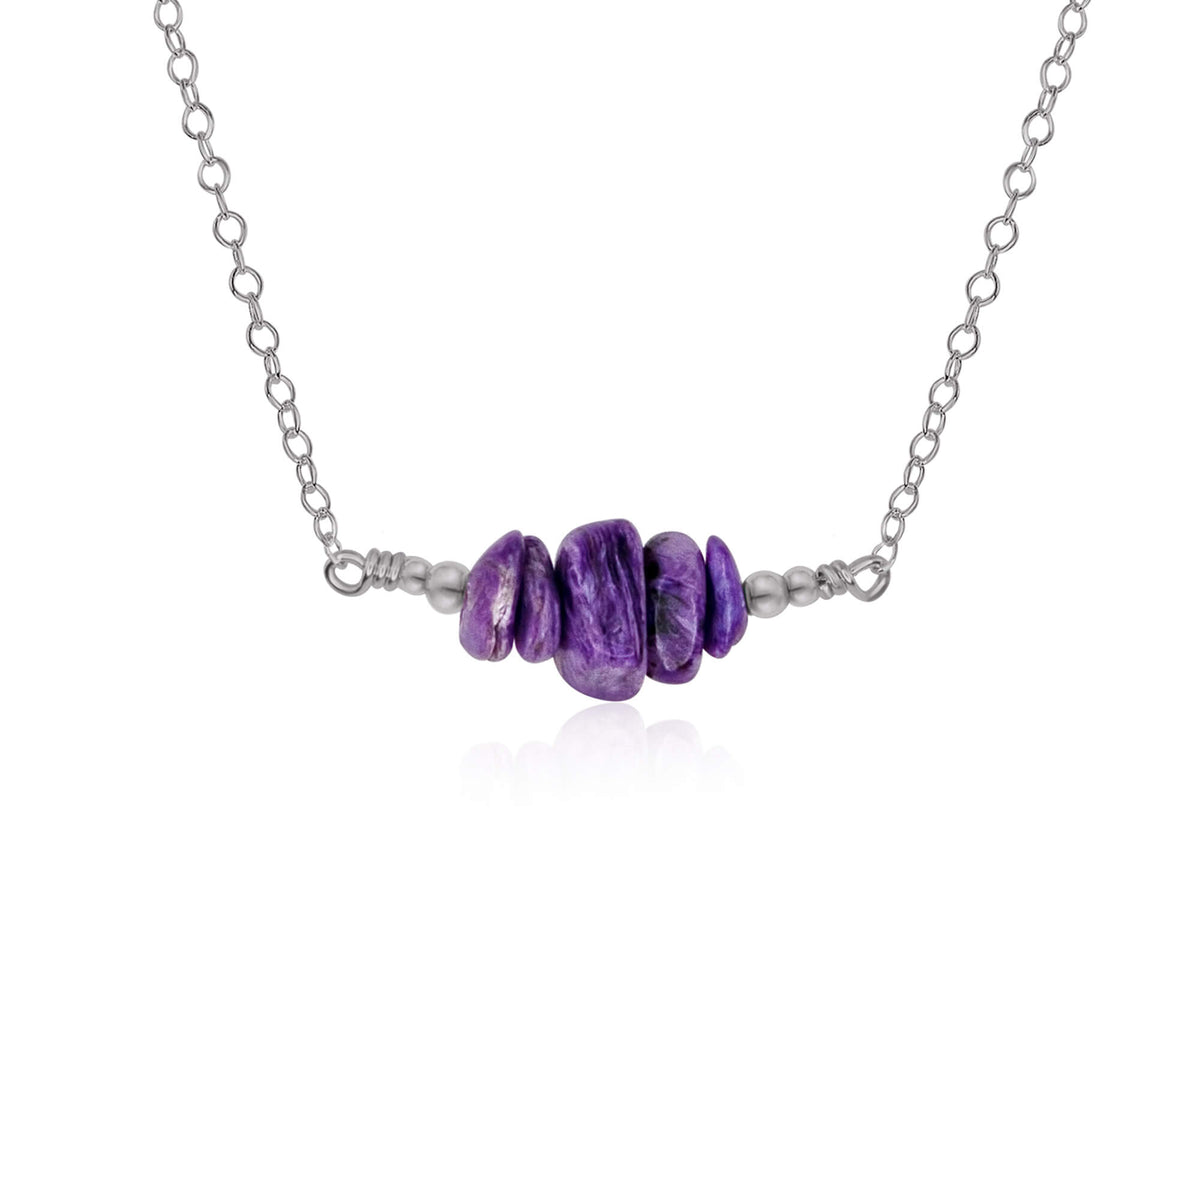 Chip Bead Bar Necklace - Charoite - Stainless Steel - Luna Tide Handmade Jewellery